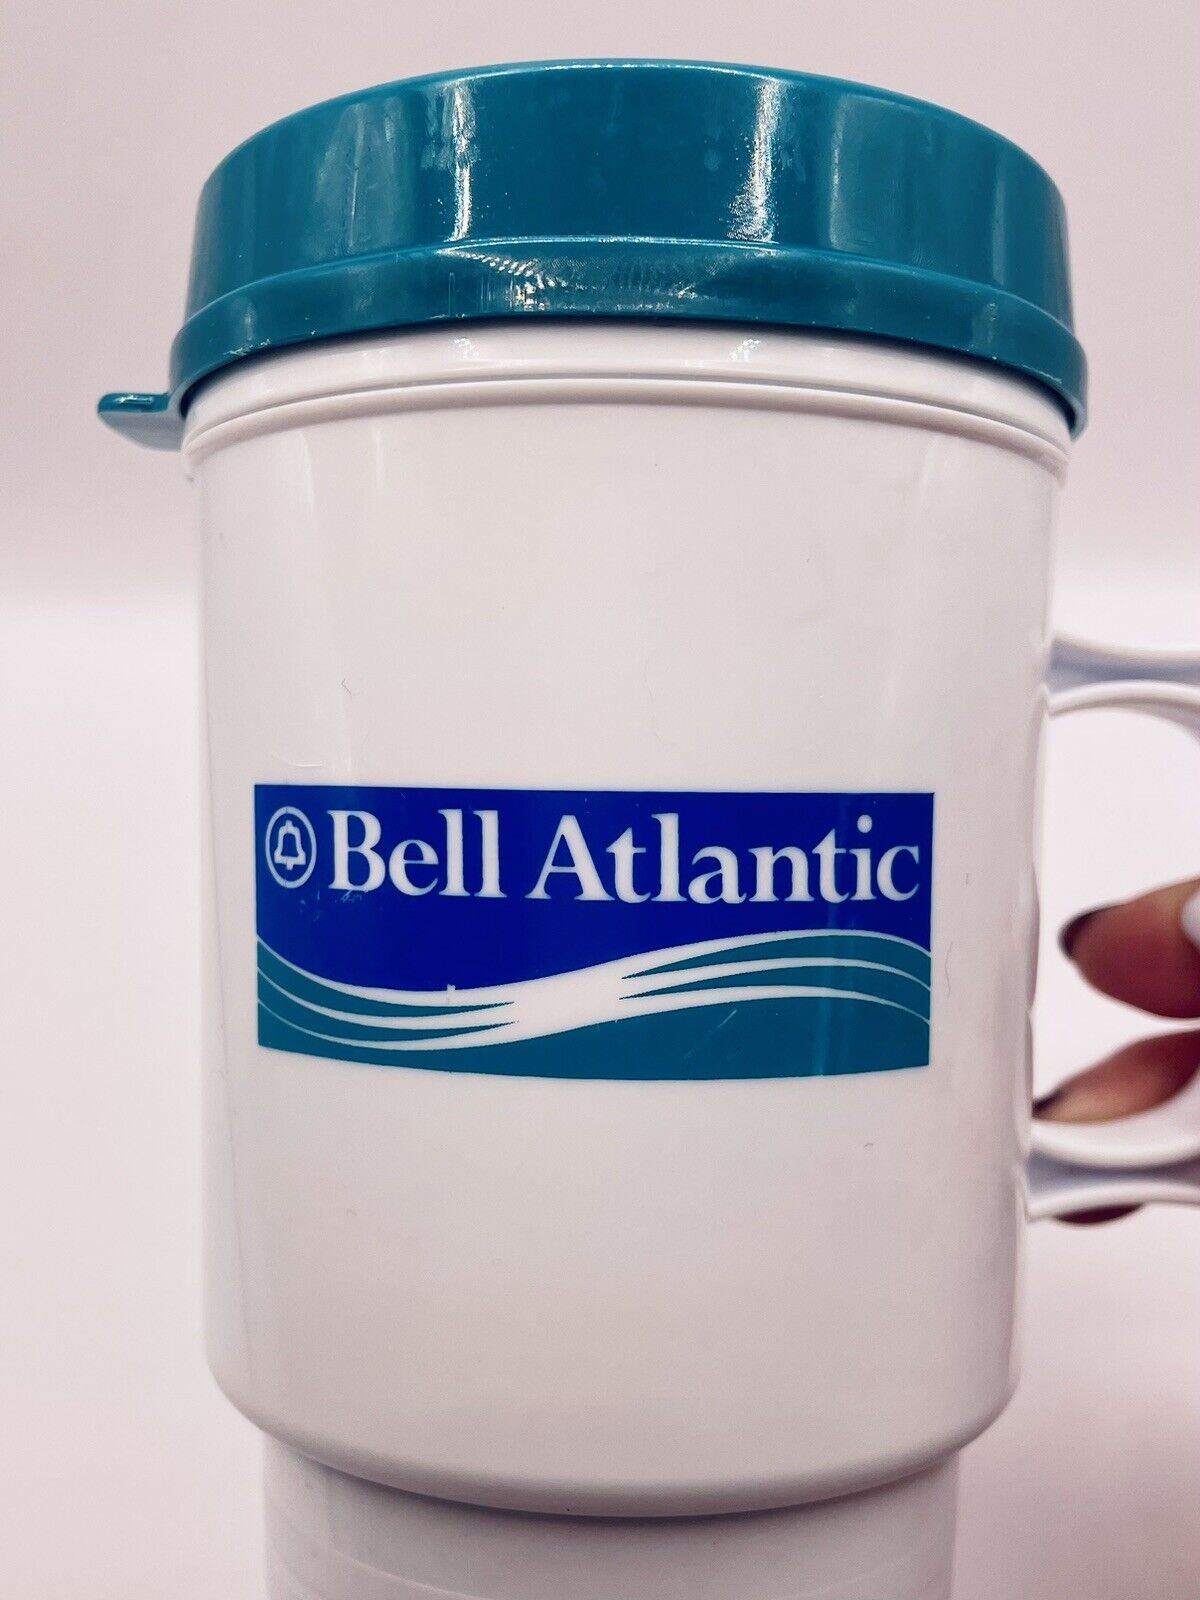 Bell Atlantic AutoMug Made in the USA Promotional Advertising Plastic Travel Mug